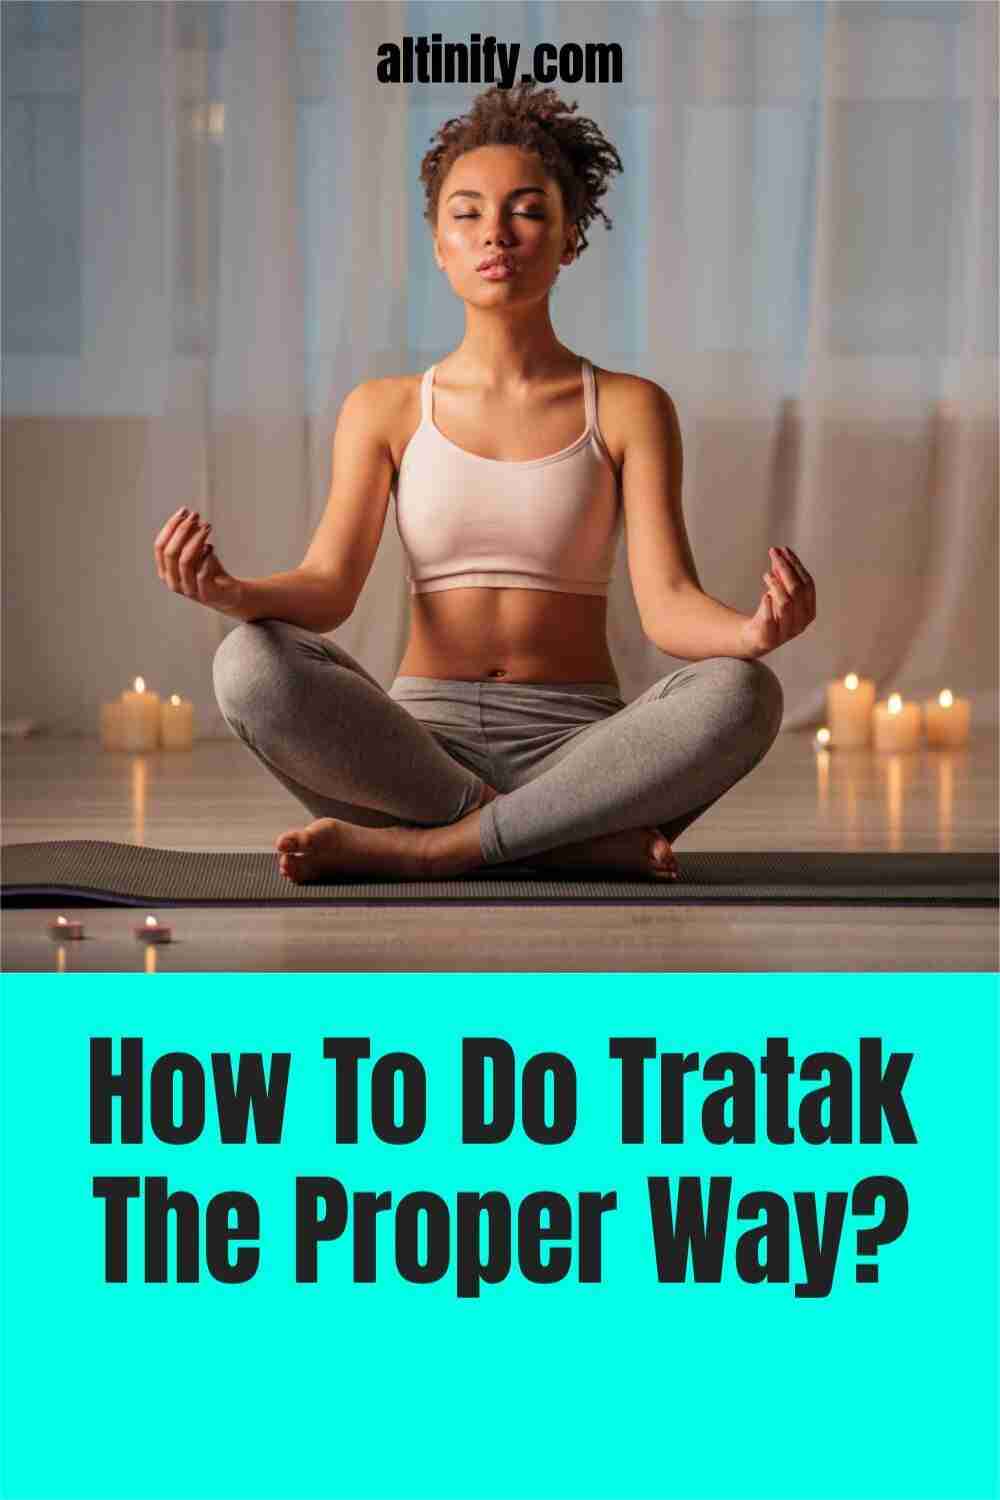 Here\'s How To Do Tratak (The proper way!)